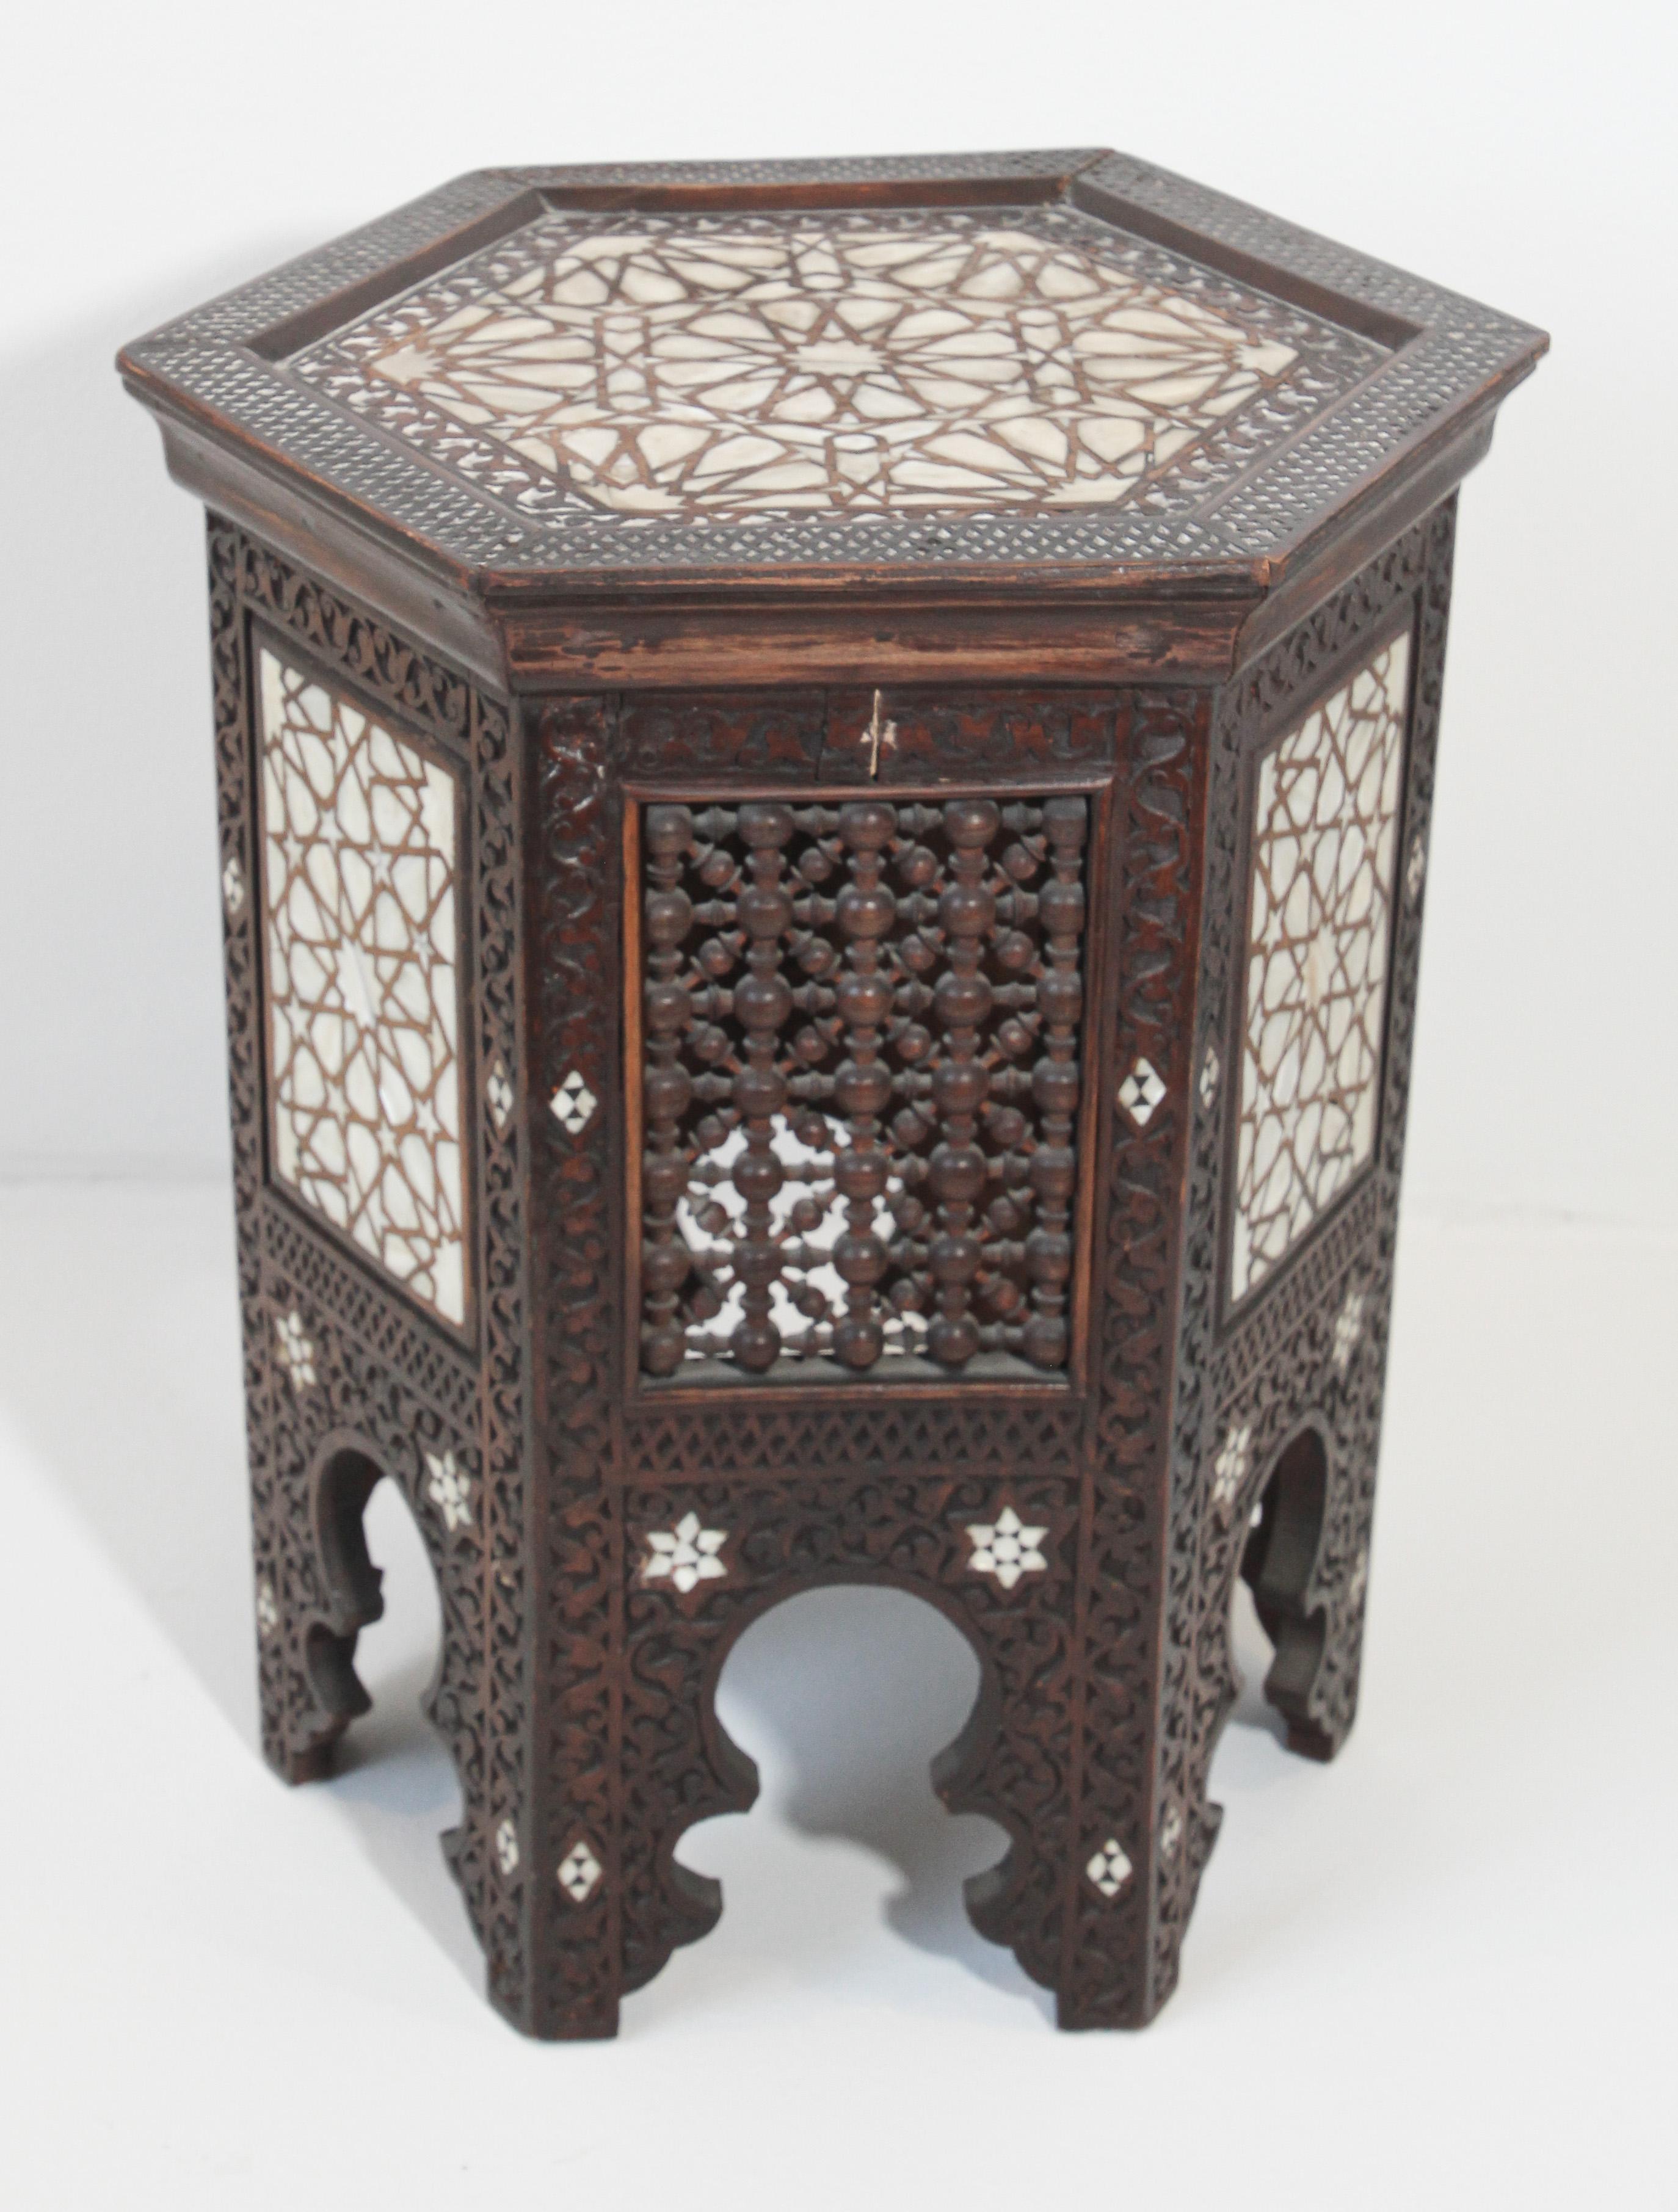 Antique 19th century Middle Eastern Moorish mother-of-pearl inlaid side table.
Hexagonal hardwood side table with mother-of-pearl inlay throughout in geometric Moorish designs.
This table has alternating side panels of white mother inlay and the